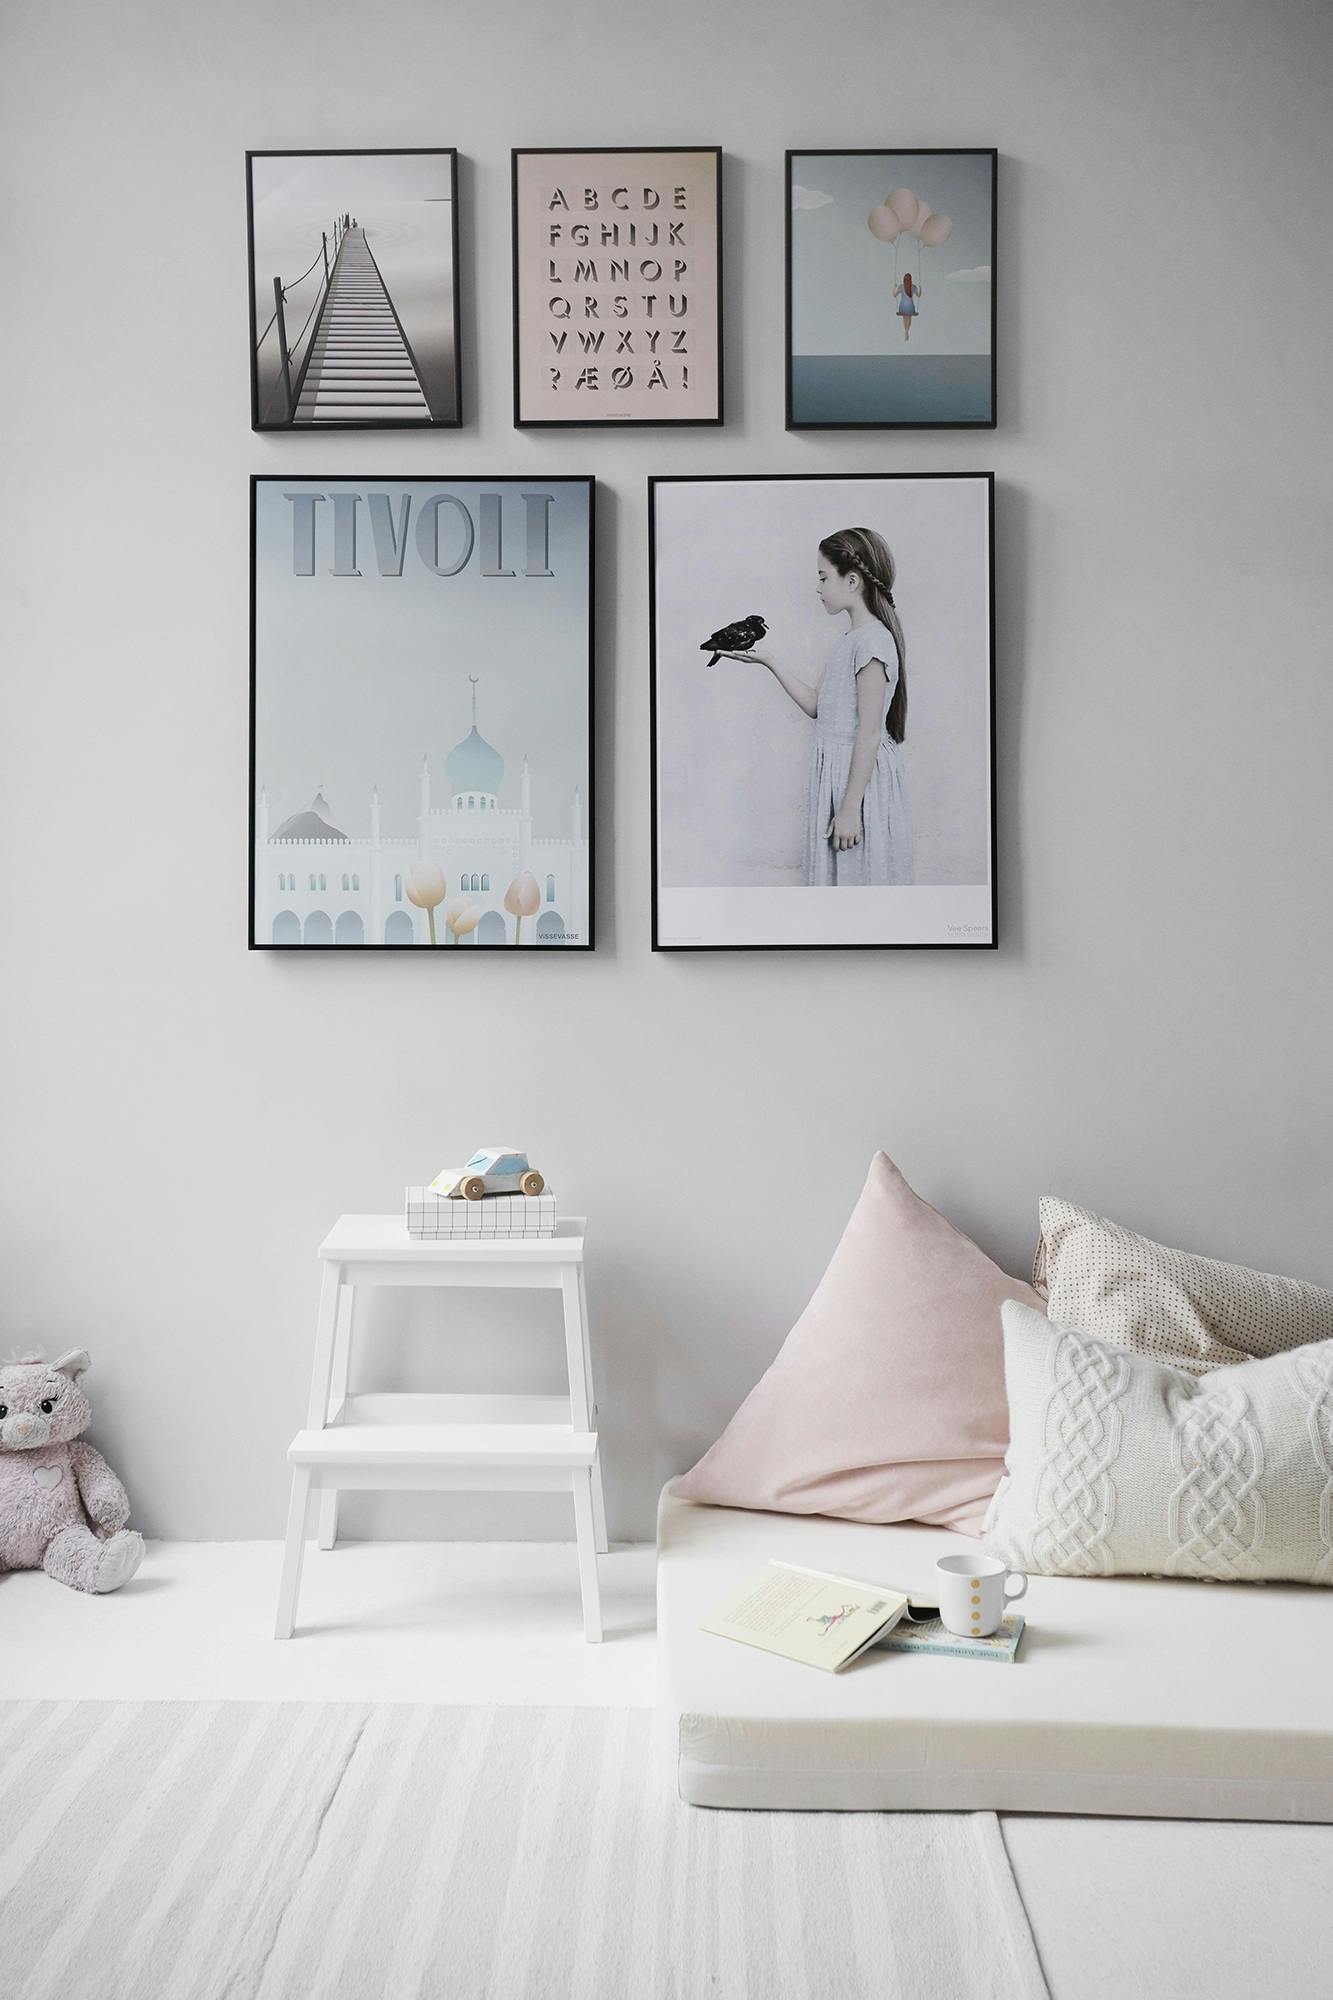 Minimalist Home Decor Ideas You Need to Try